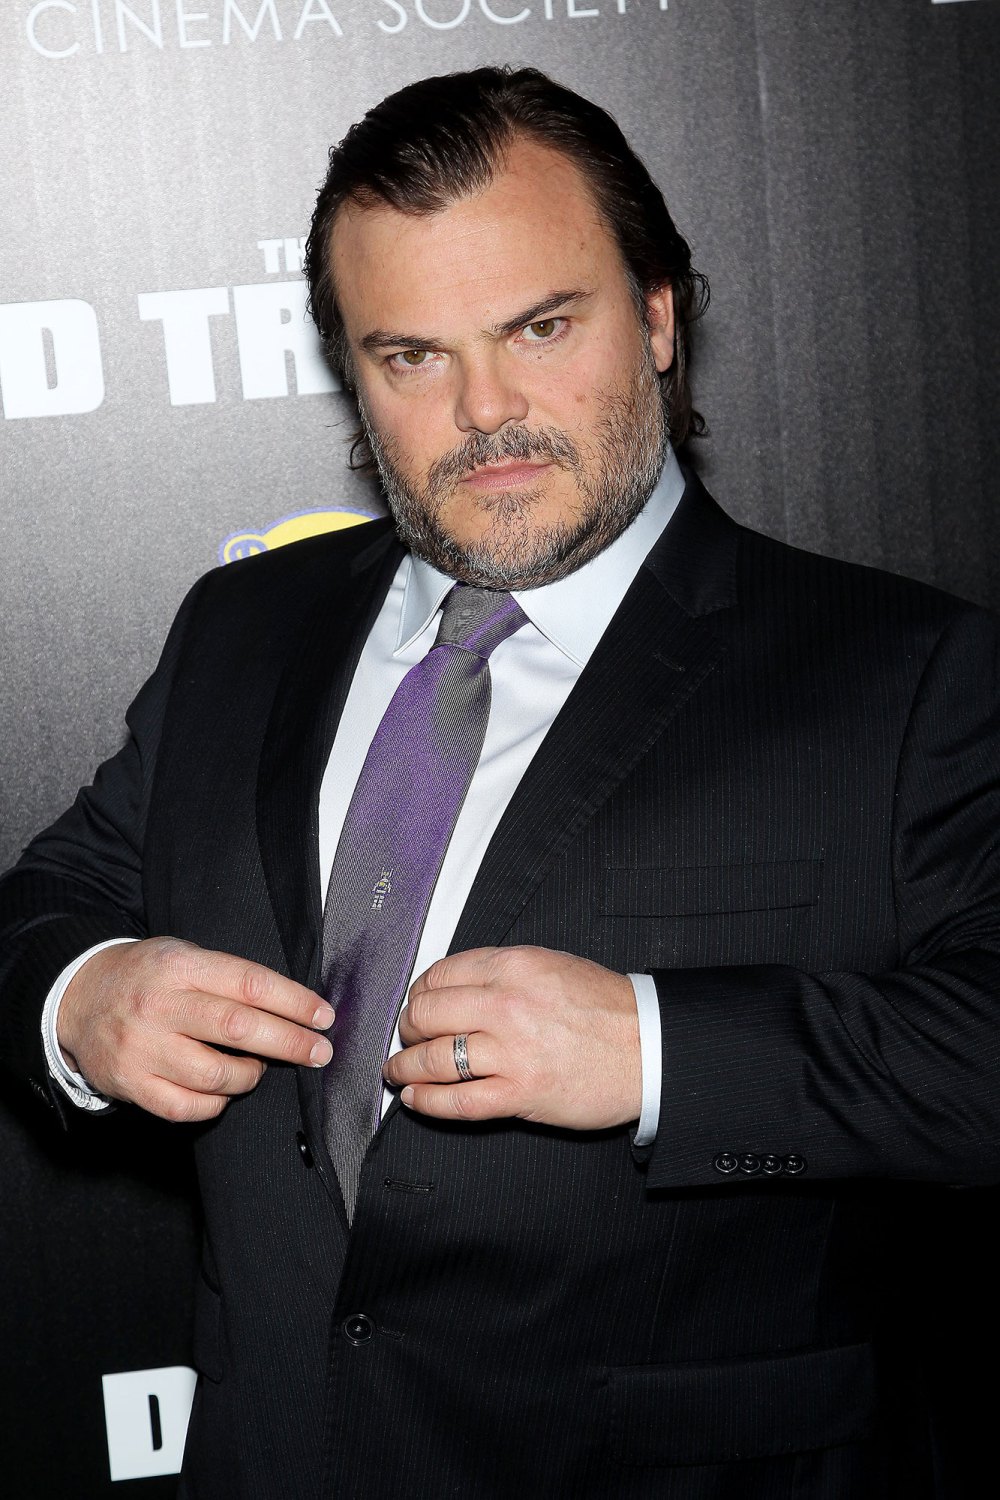 Jack Black Opens Up About Losing His Big Brother to AIDS, Past Drug Abuse